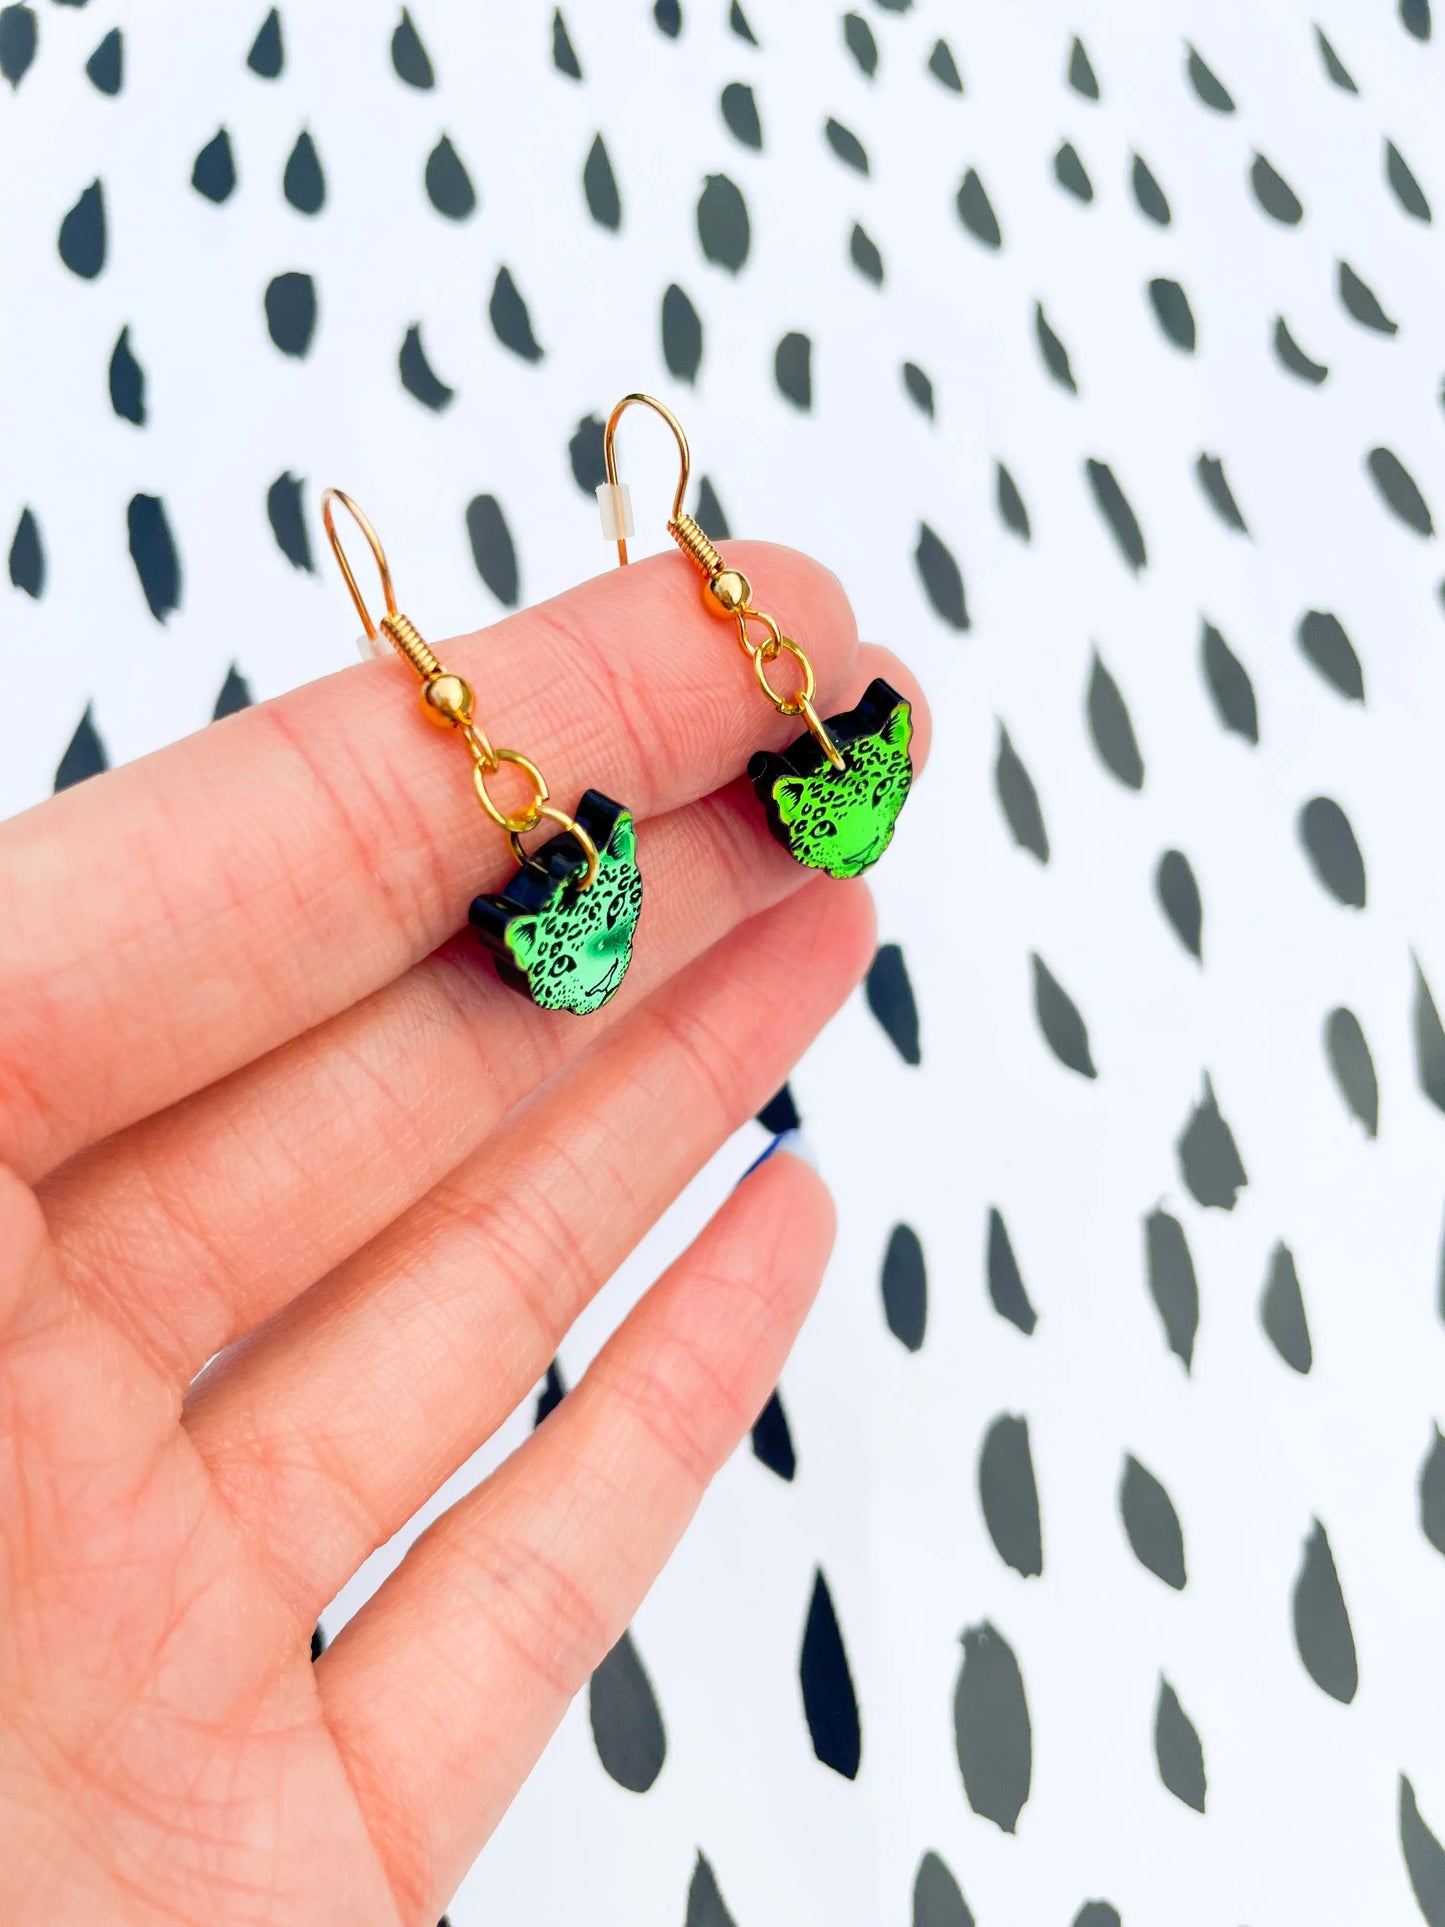 Small Iridescent Orange and Green Acrylic Leopard Face Dangle Earrings from Sapphire Frills